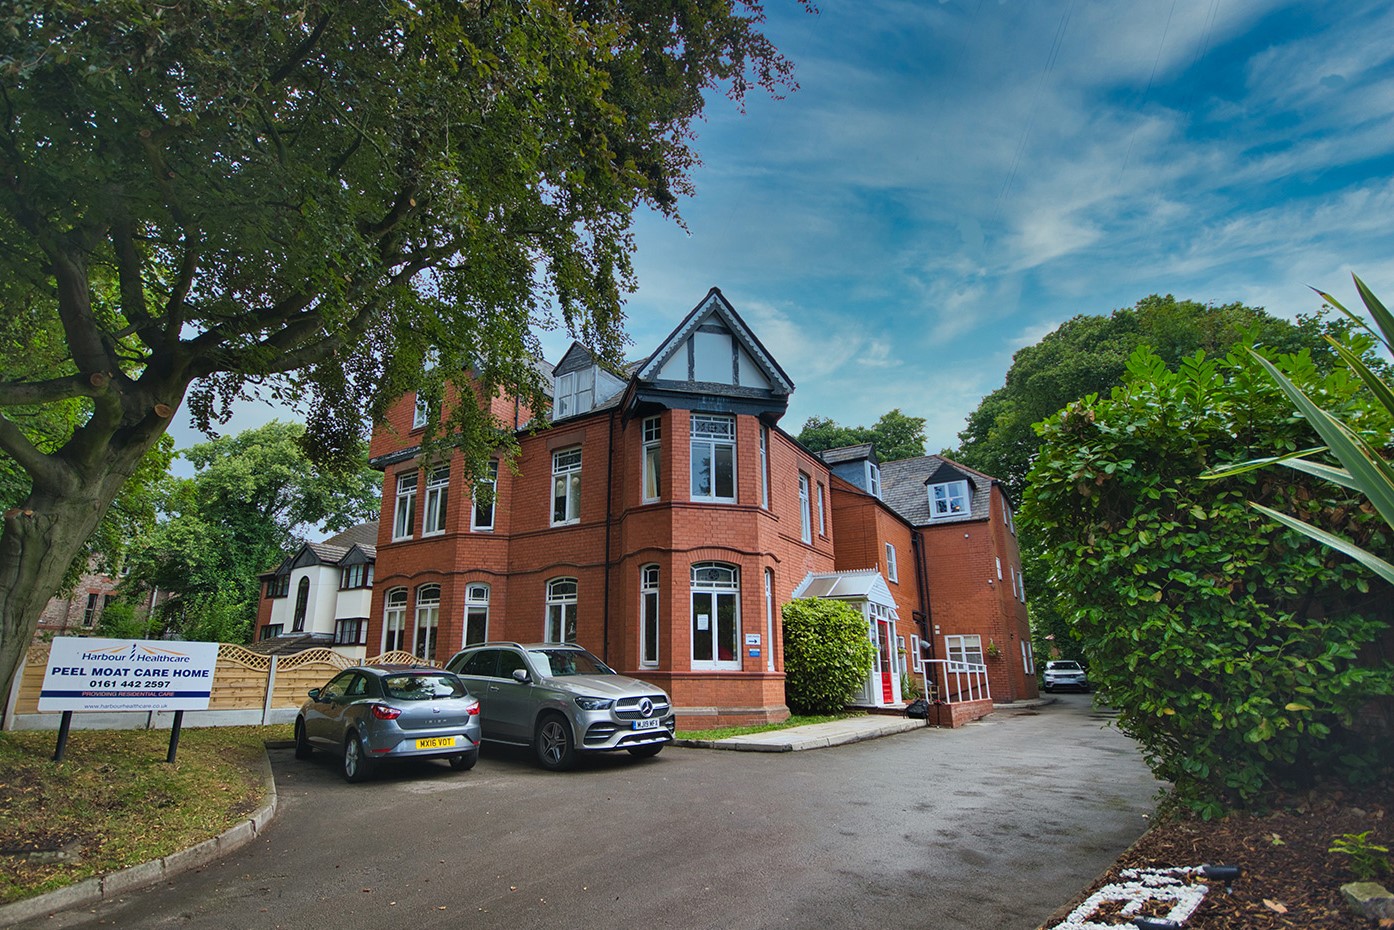 Peel Moat Care Home, Stockport